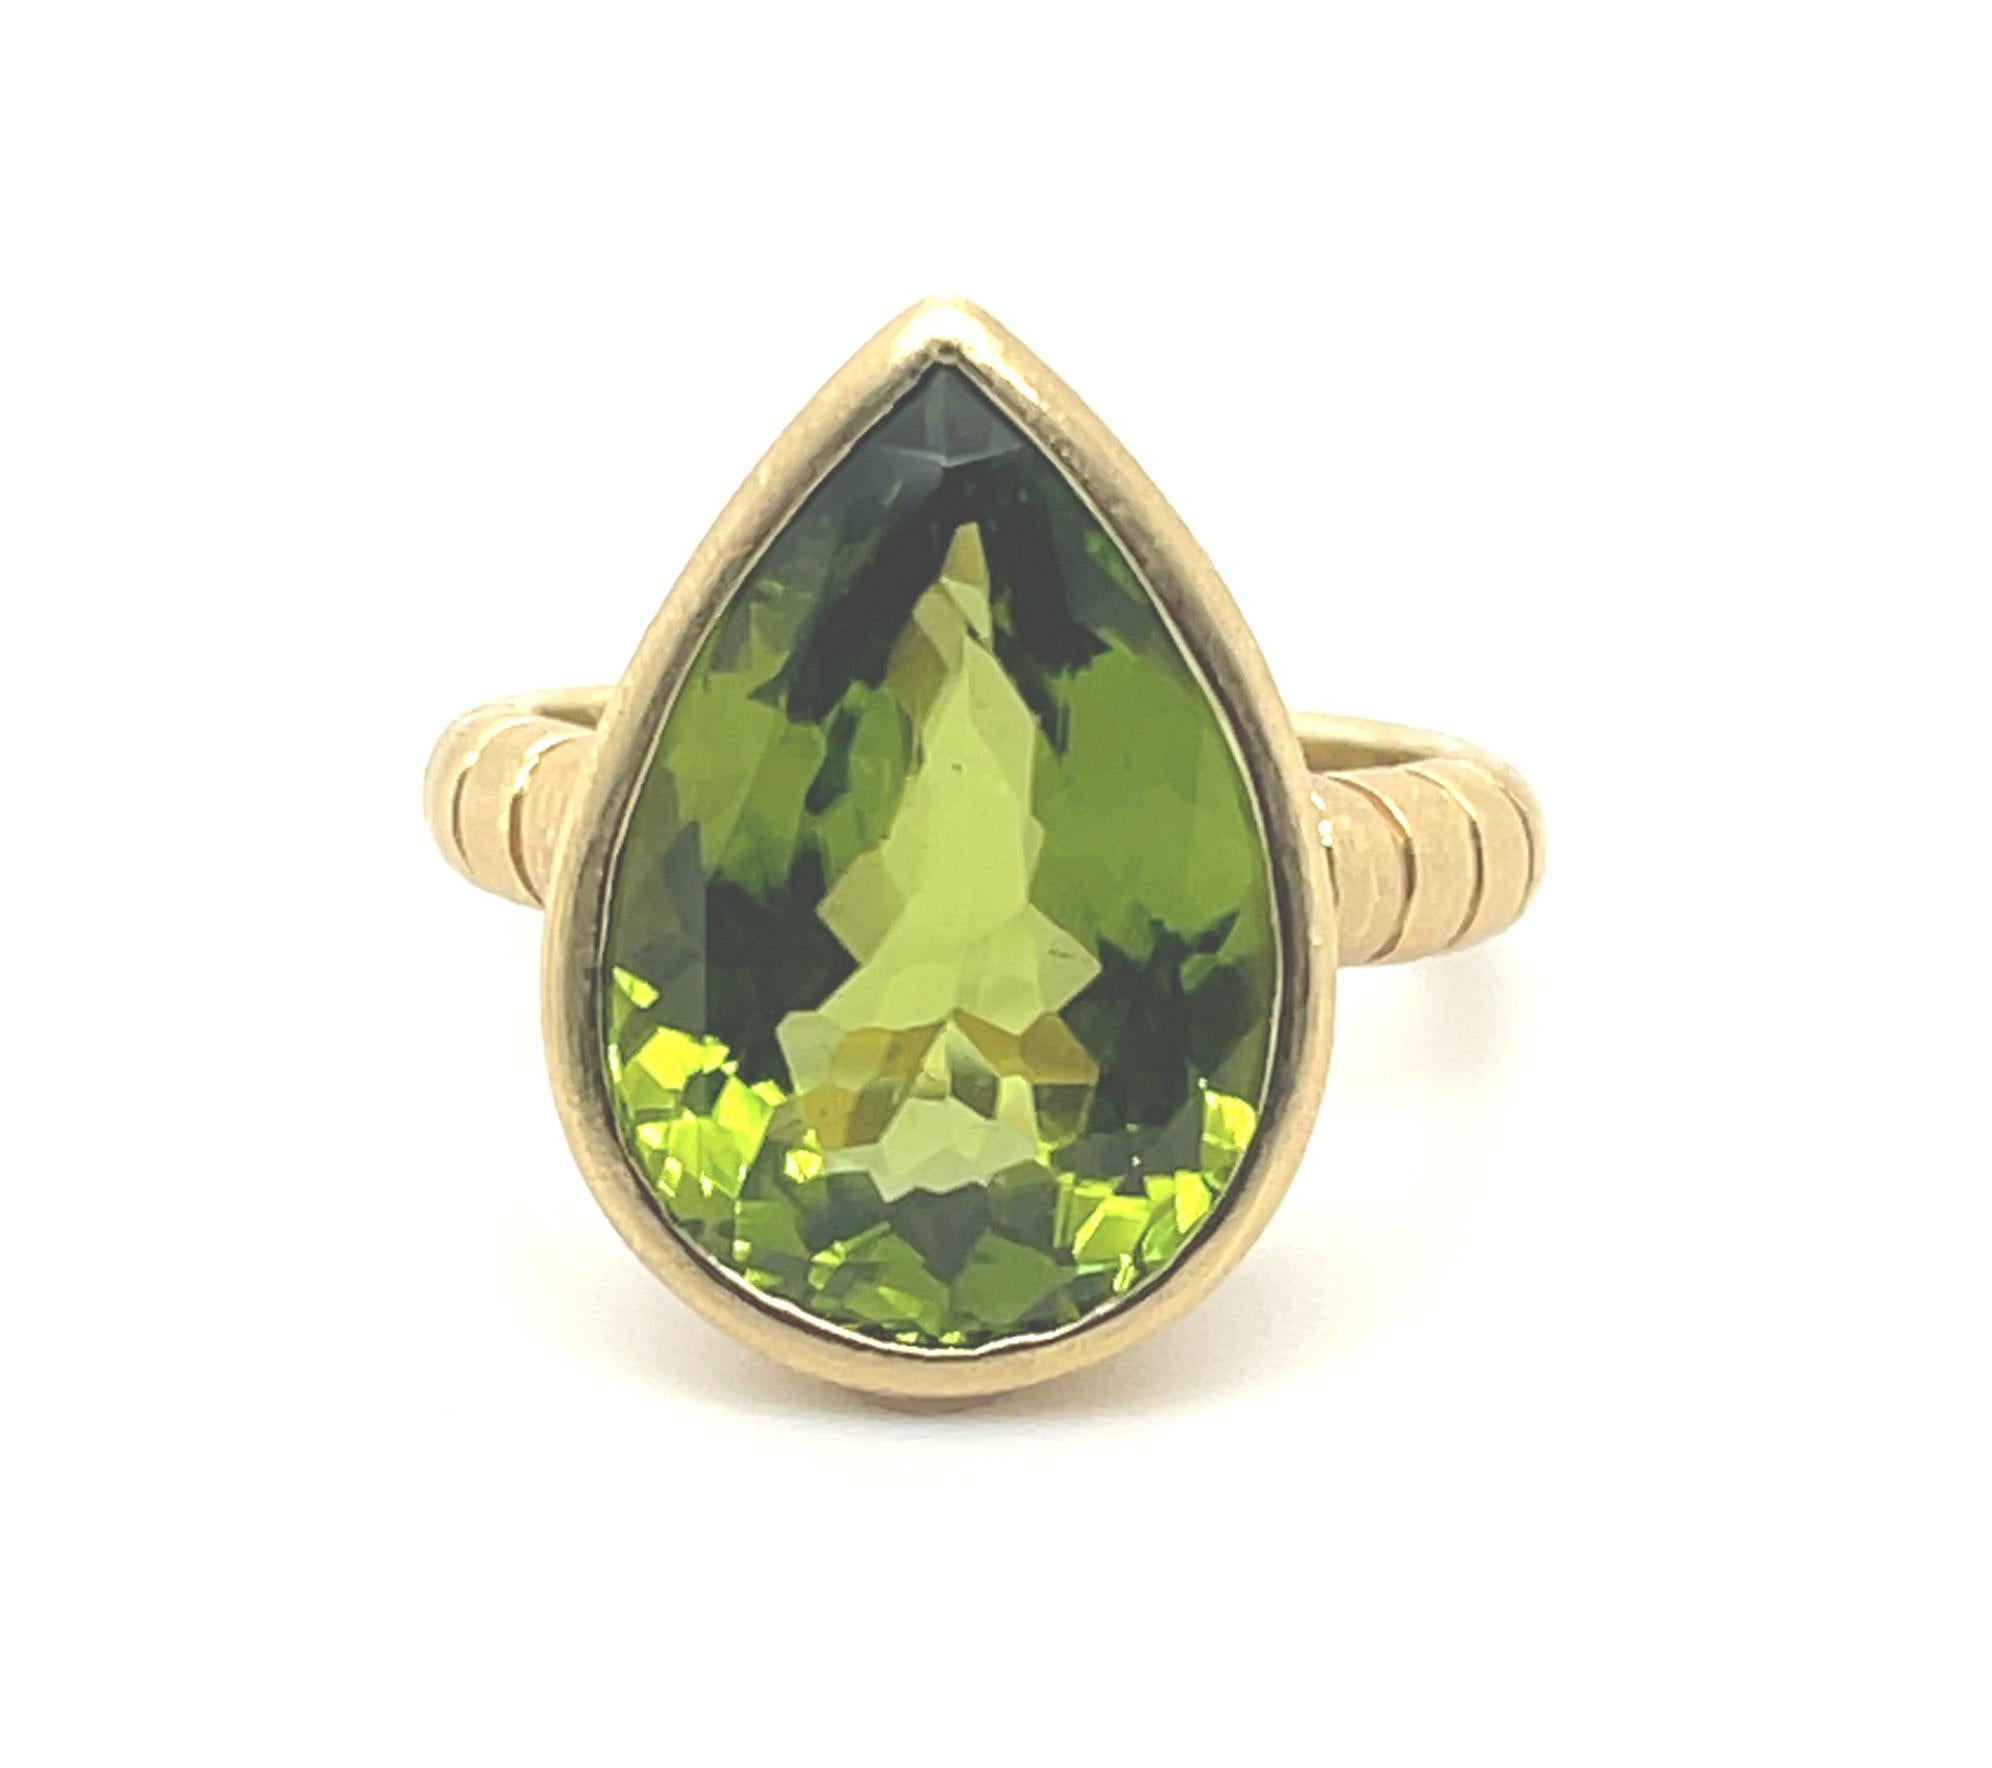 A large, luscious, lime-green peridot is featured in this ring. It is clean and bright and weighs 8.37 carats. It is bezel set in our signature brushed and engraved 18k yellow gold setting. Pear shaped peridots are not often seen, making this